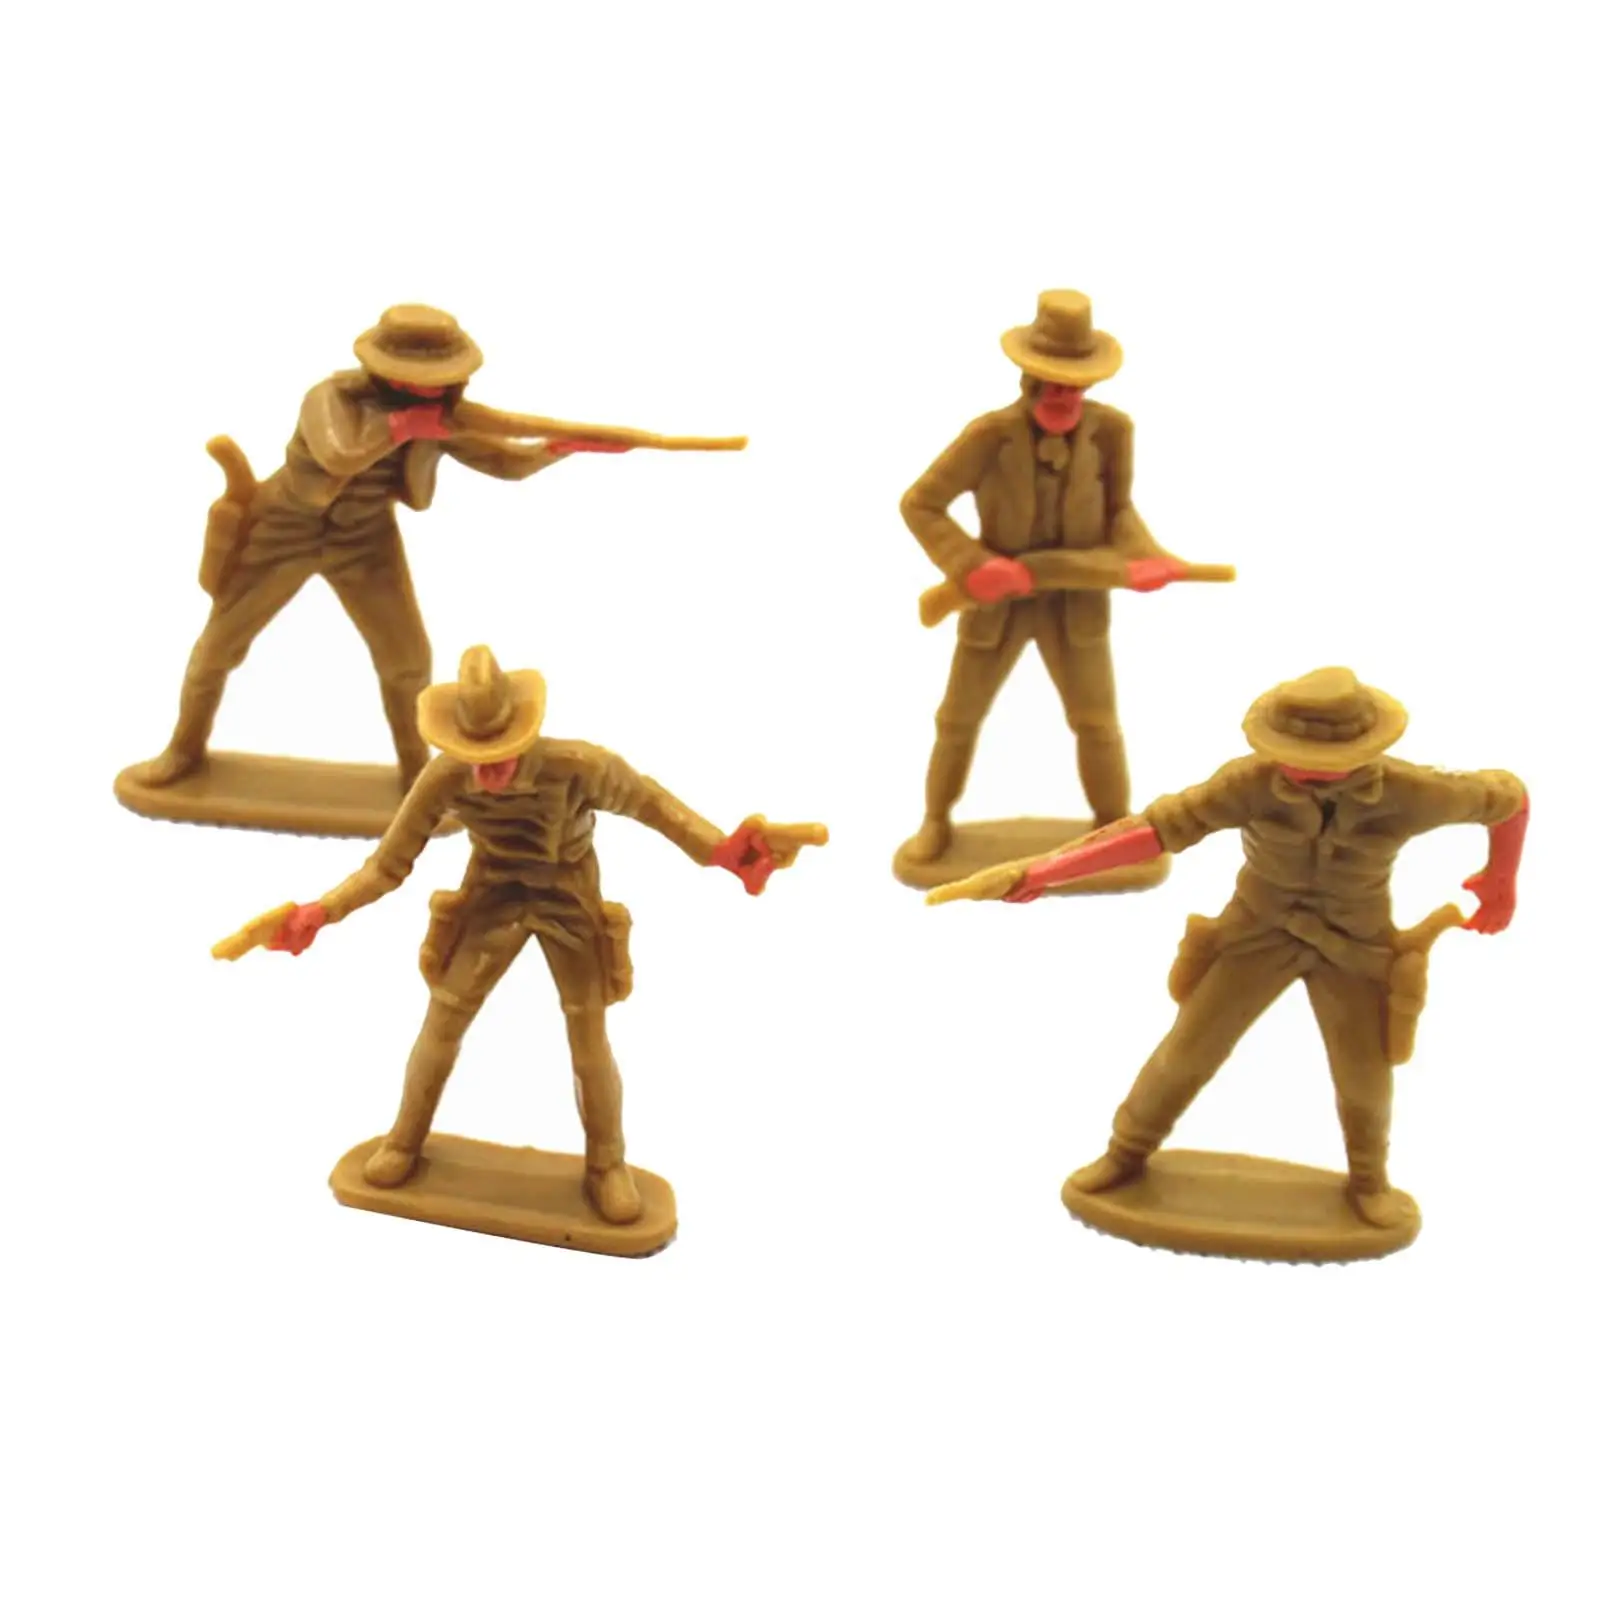 4Pcs Simulation Cowboy People Figures DIY Projects Layout Decoration Fairy Garden Movie Props Collections Diorama Scenery Decor